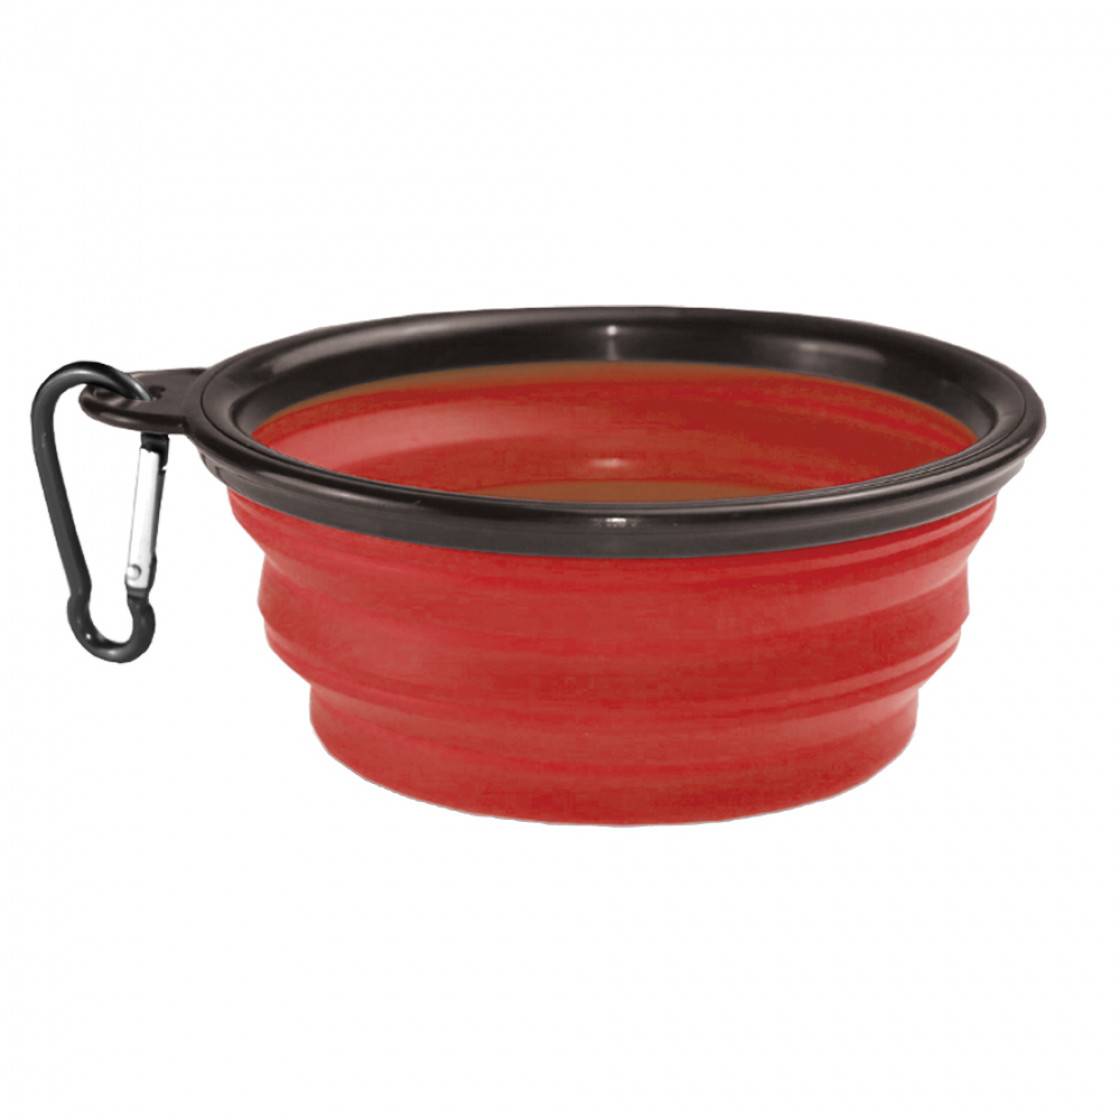 Kuma Collapsible Bowl - red